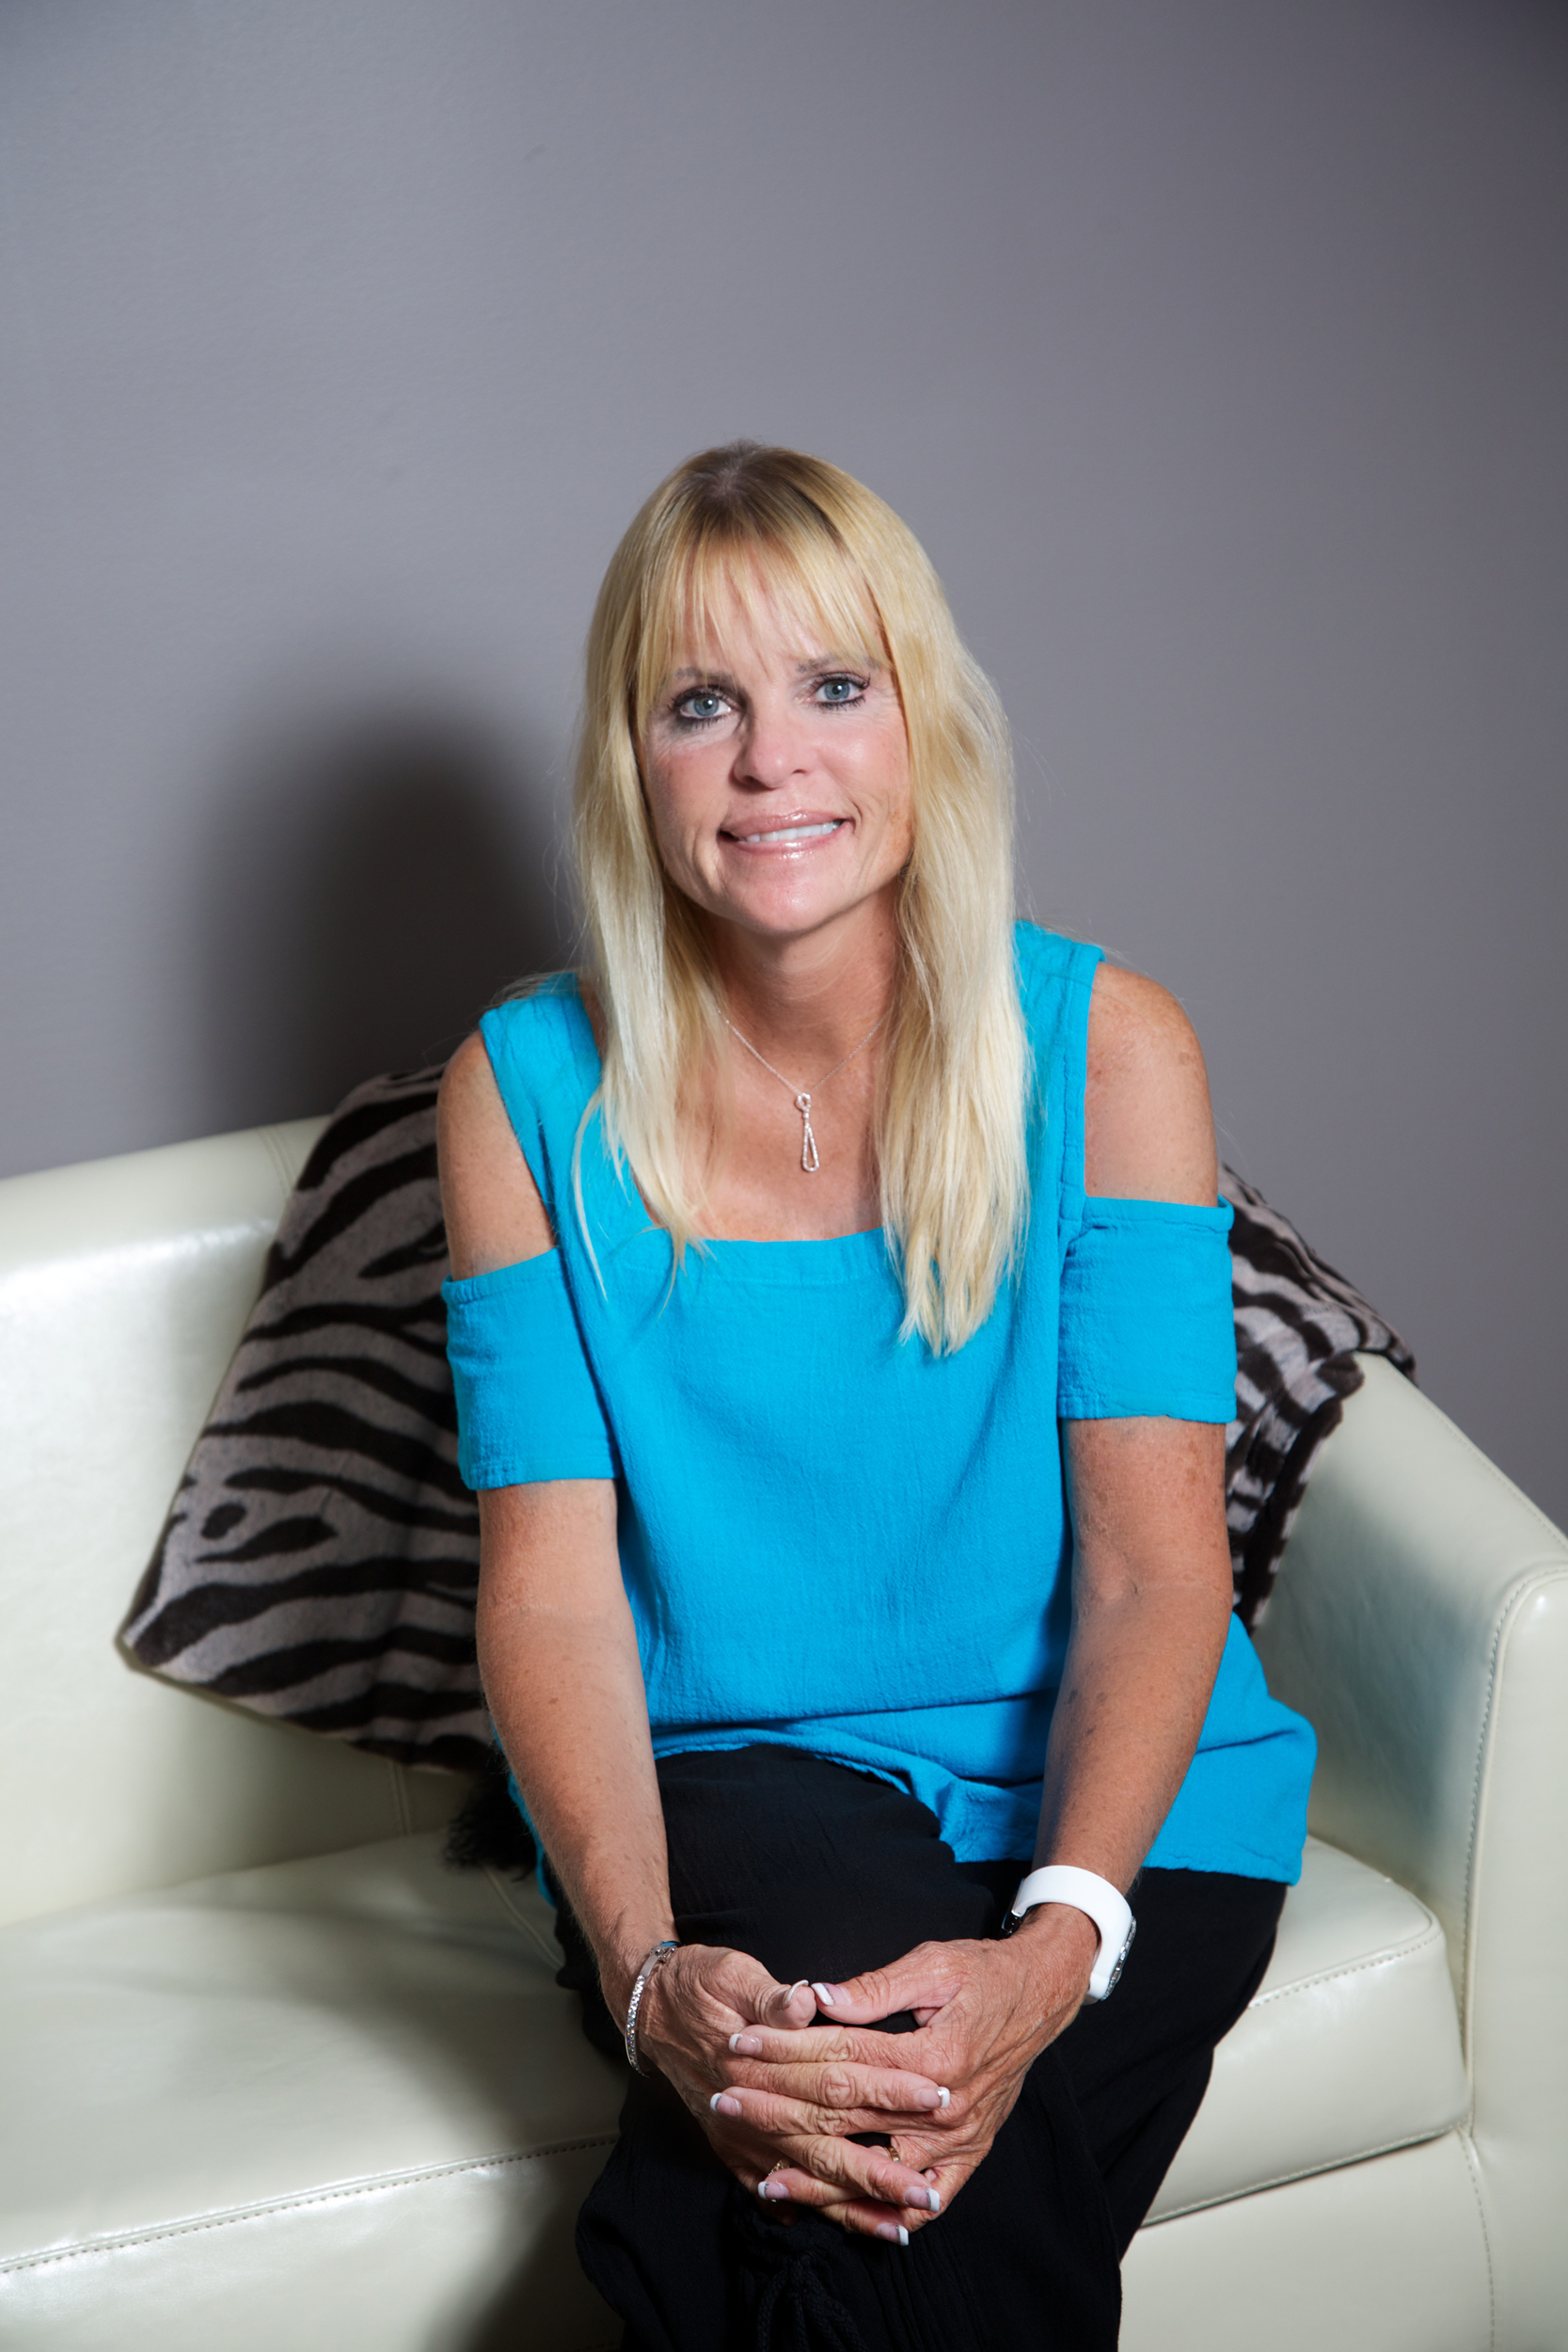 Lyn Hogrefe, owner and CEO of Happy Hormone Cottage